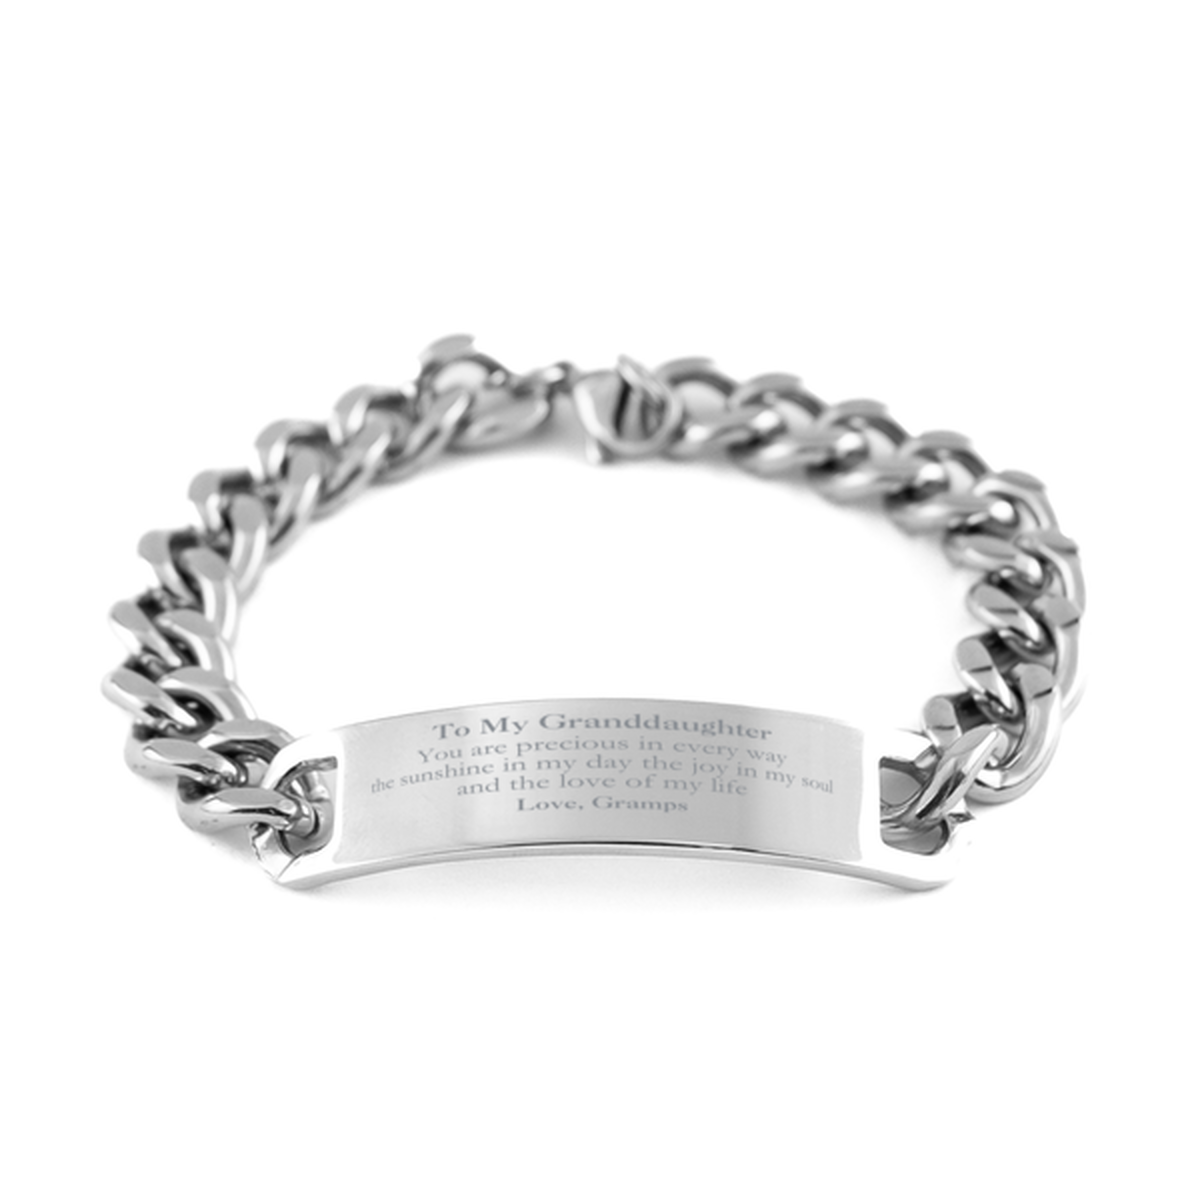 Graduation Gifts for Granddaughter Cuban Chain Stainless Steel Bracelet Present from Gramps, Christmas Granddaughter Birthday Gifts Granddaughter You are precious in every way the sunshine in my day. Love, Gramps